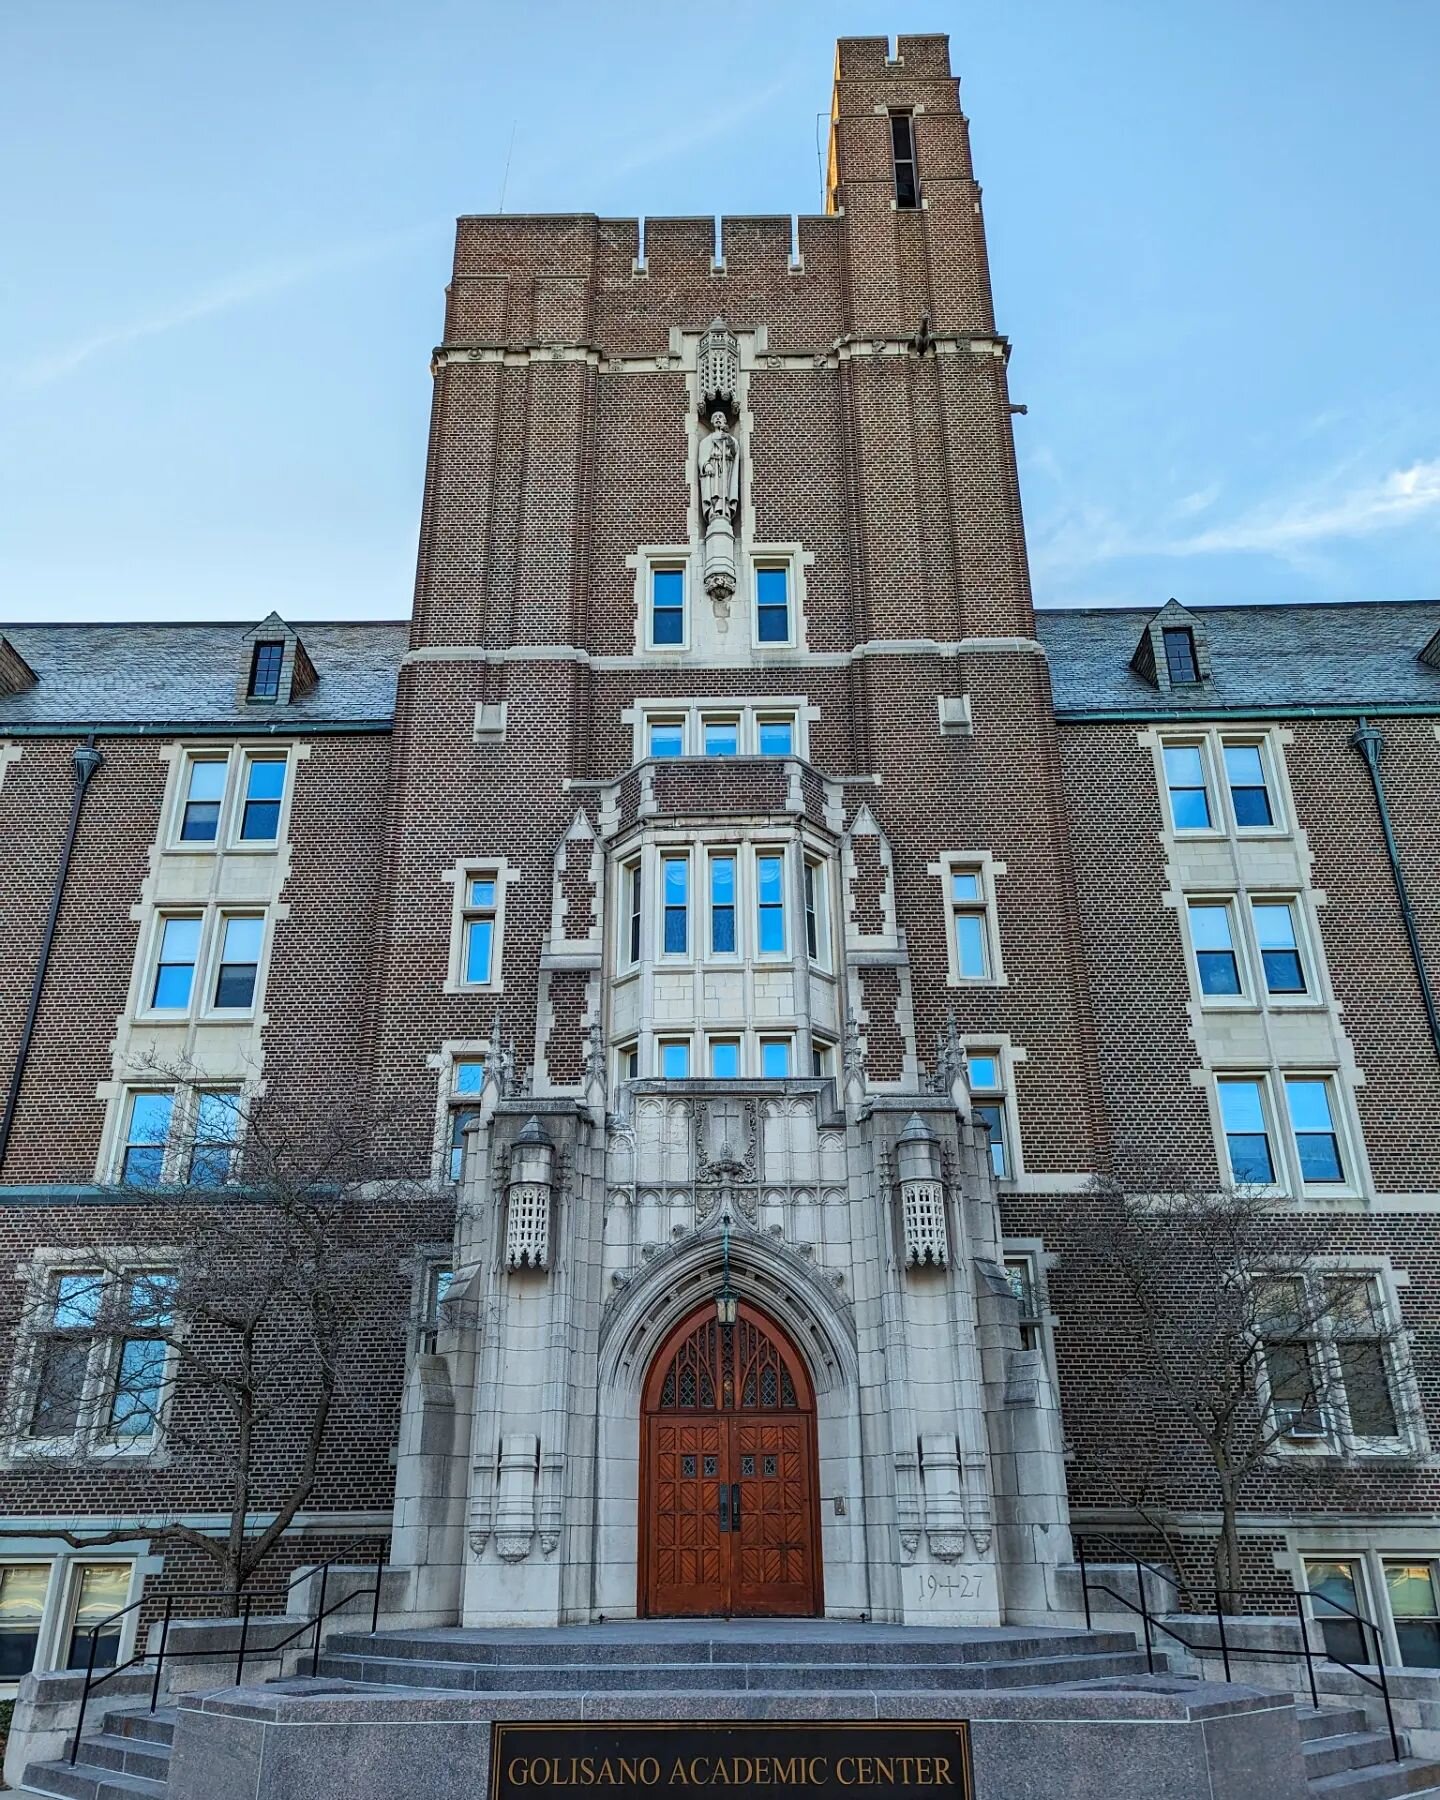 Today we stopped by @nazuniversity to speak with students in the history department about Historic Structure and Condition Reports. Of course we can't help but admire the striking original 1928 collegiate gothic design of the Golisano Academic Center